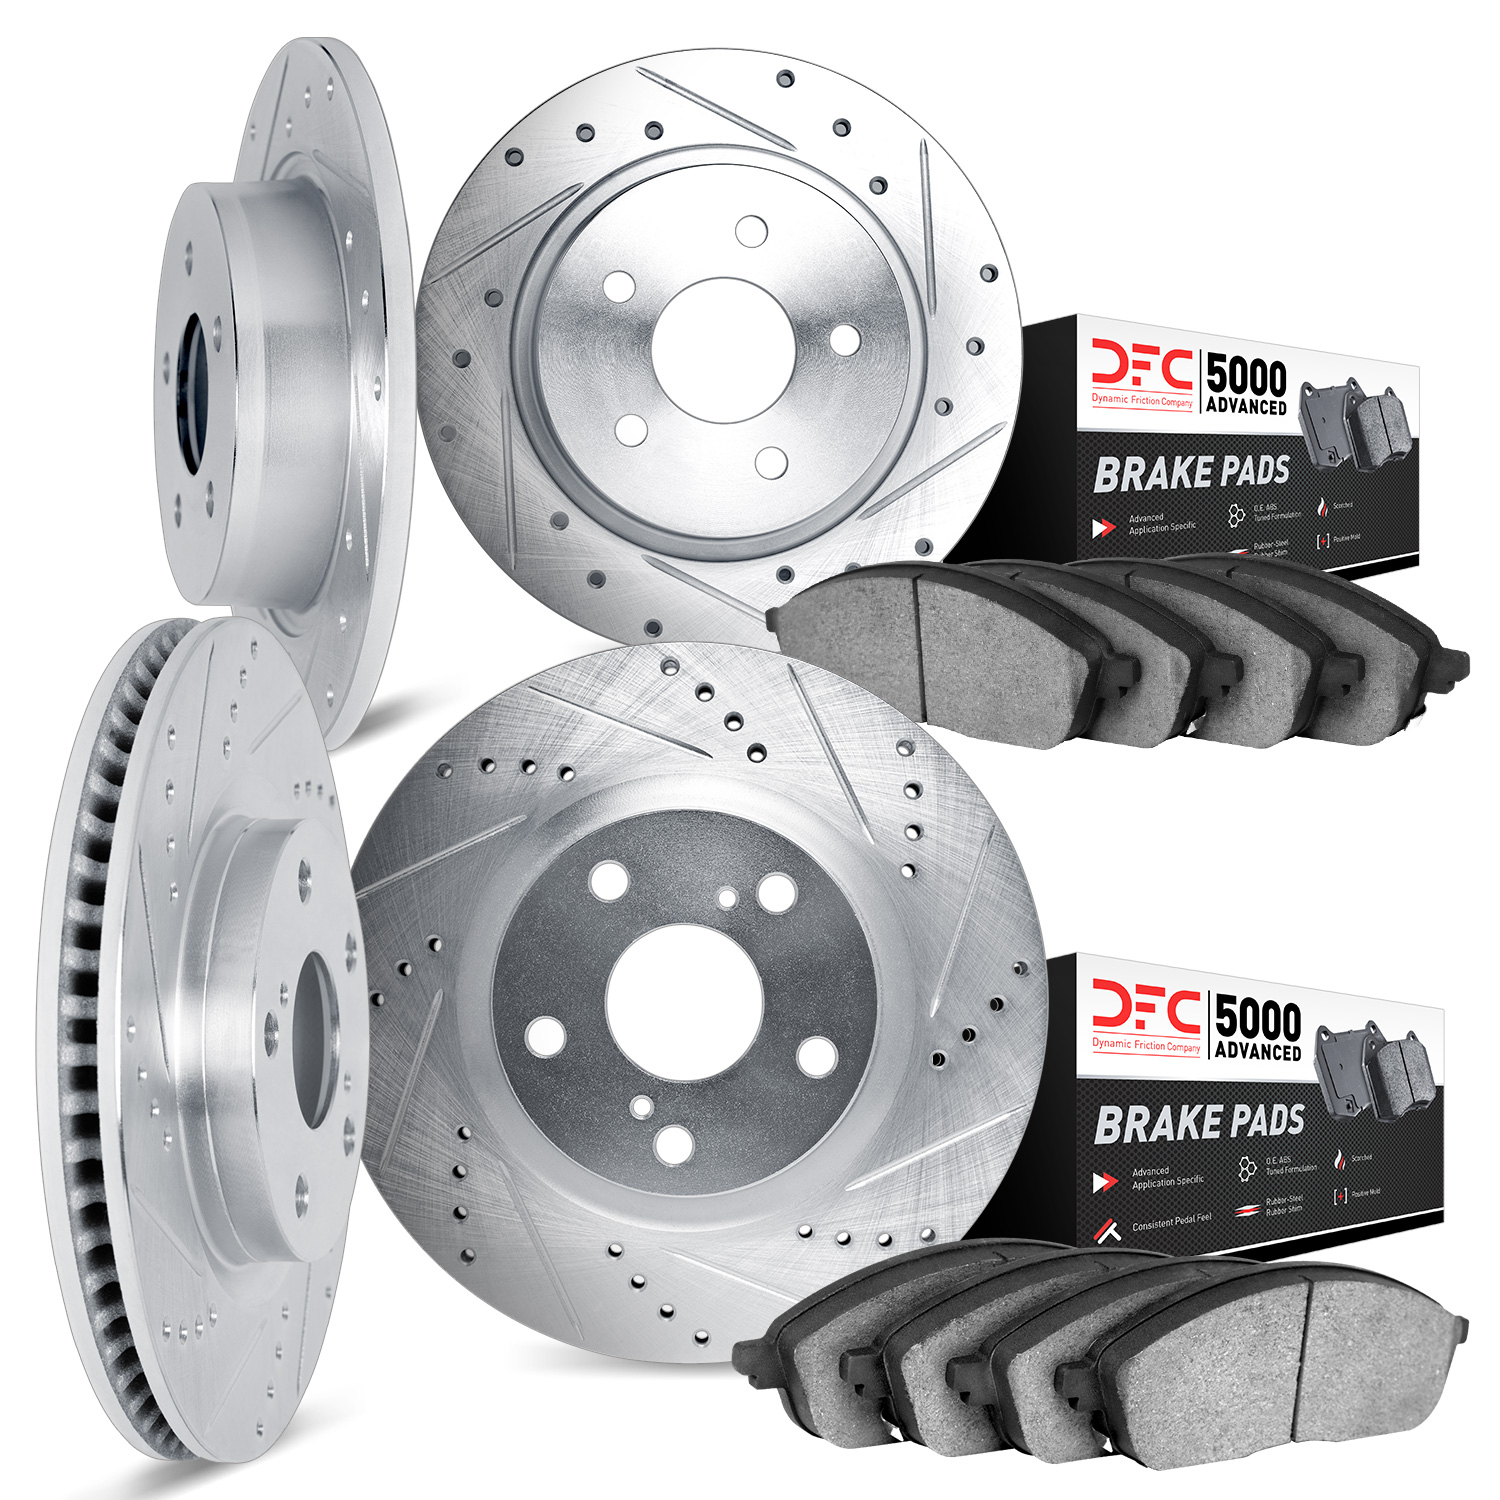 7504-59055 Drilled/Slotted Brake Rotors w/5000 Advanced Brake Pads Kit [Silver], Fits Select Acura/Honda, Position: Front and Re